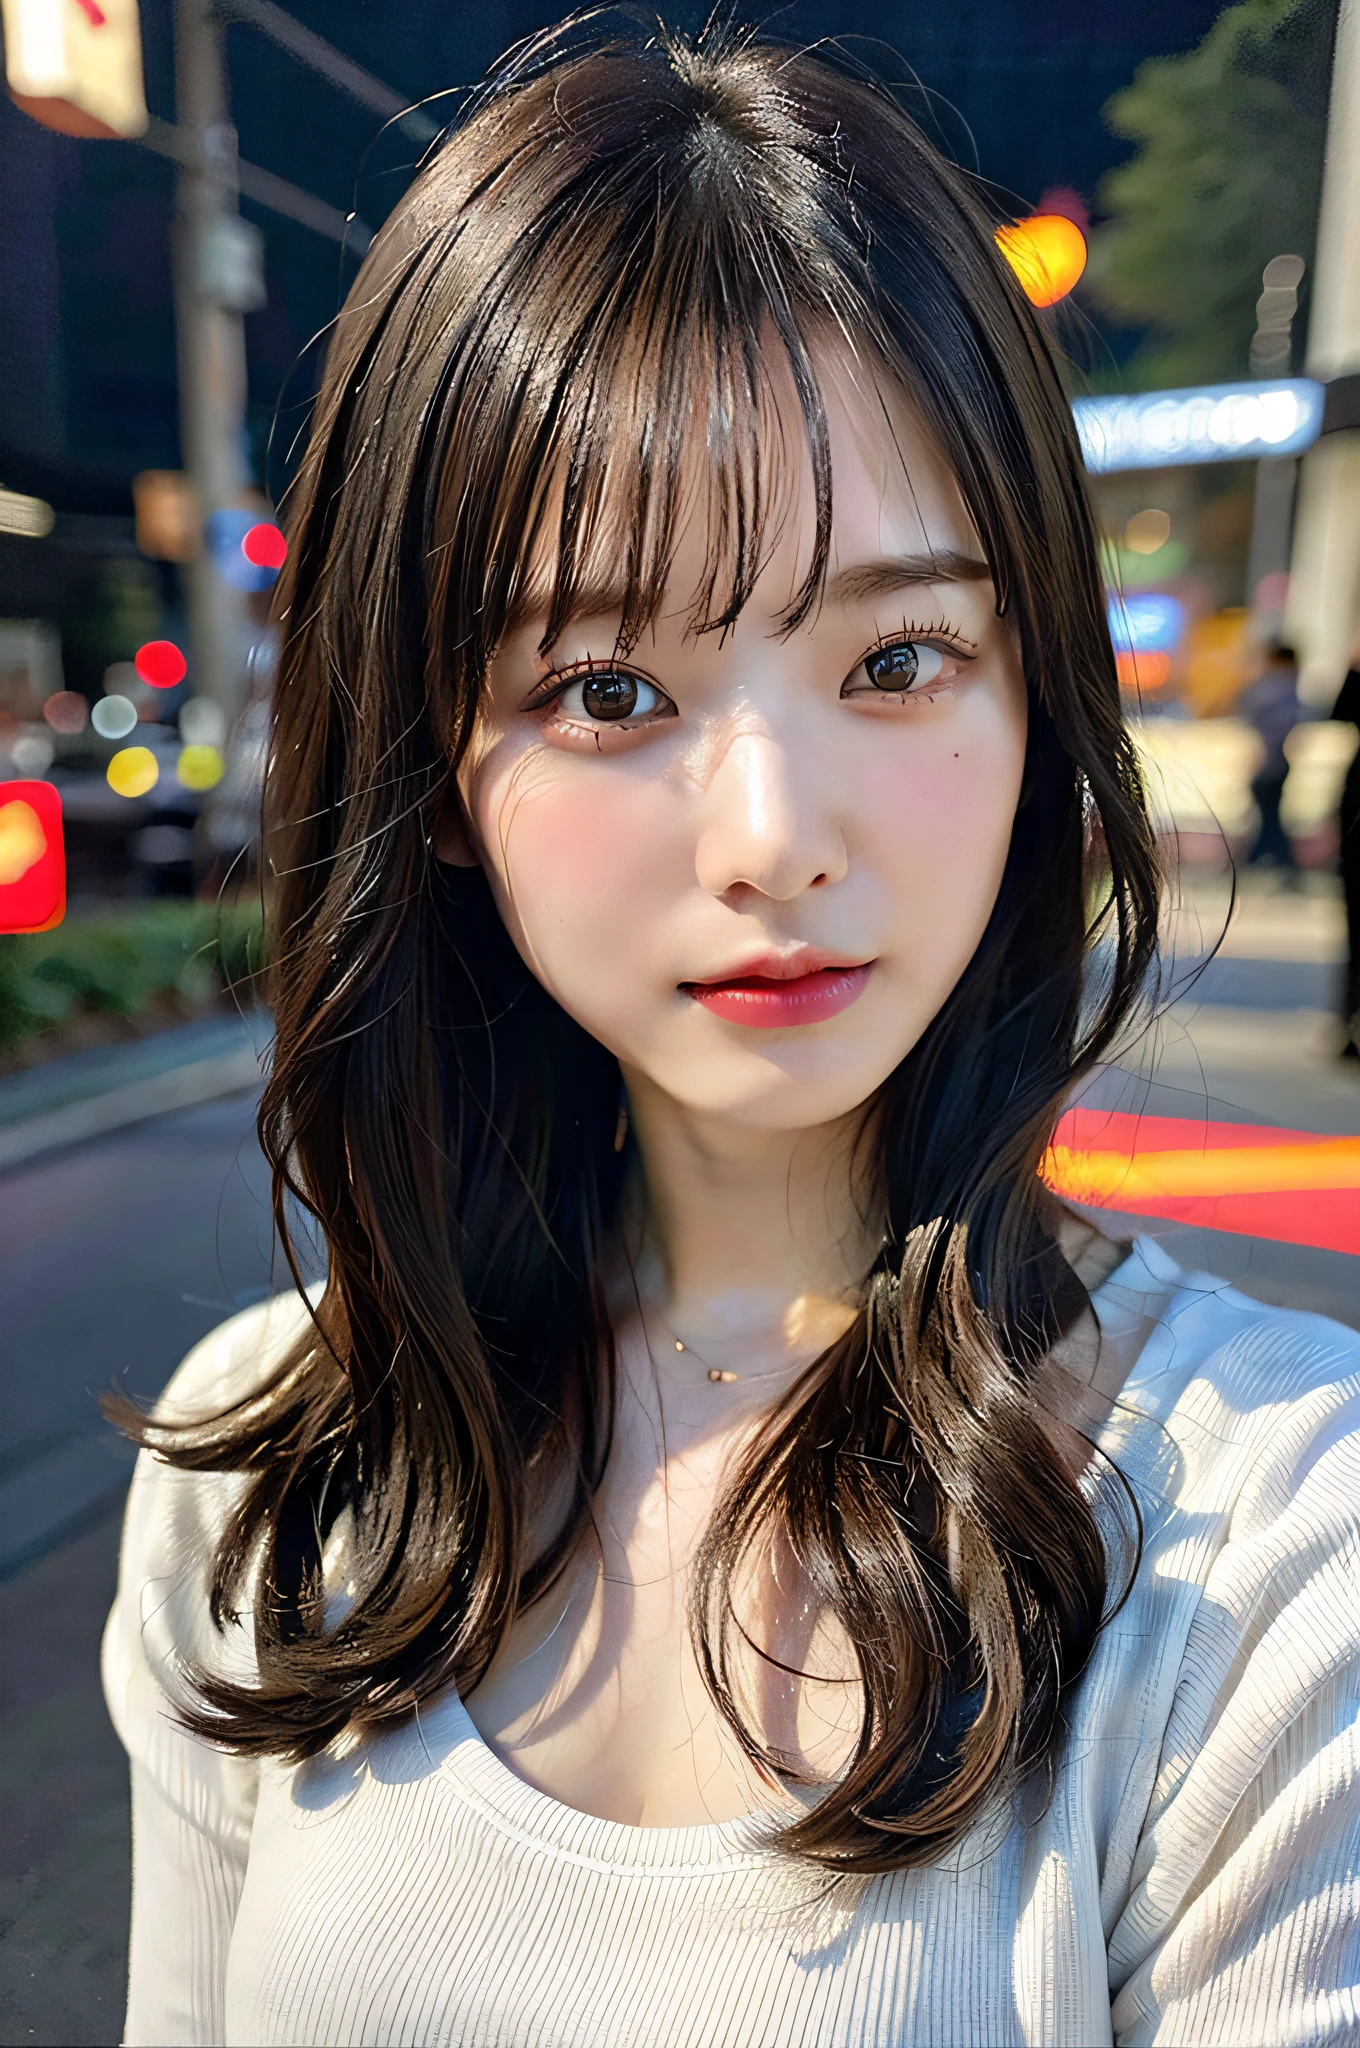 8K, Best Quality, Masterpiece, Ultra High Definition, (Photorealistic: 1.4), Raw Photos, Real Skin Texture, (Film Grain: 1.3), 1girl, Beautiful Detailed Eyes and Face, Masterpiece, Best Quality, Upper Body, Casual Clothing, Japan Idol, Fair Skin, Beveled Bangs, Sting, Droopy Eyes